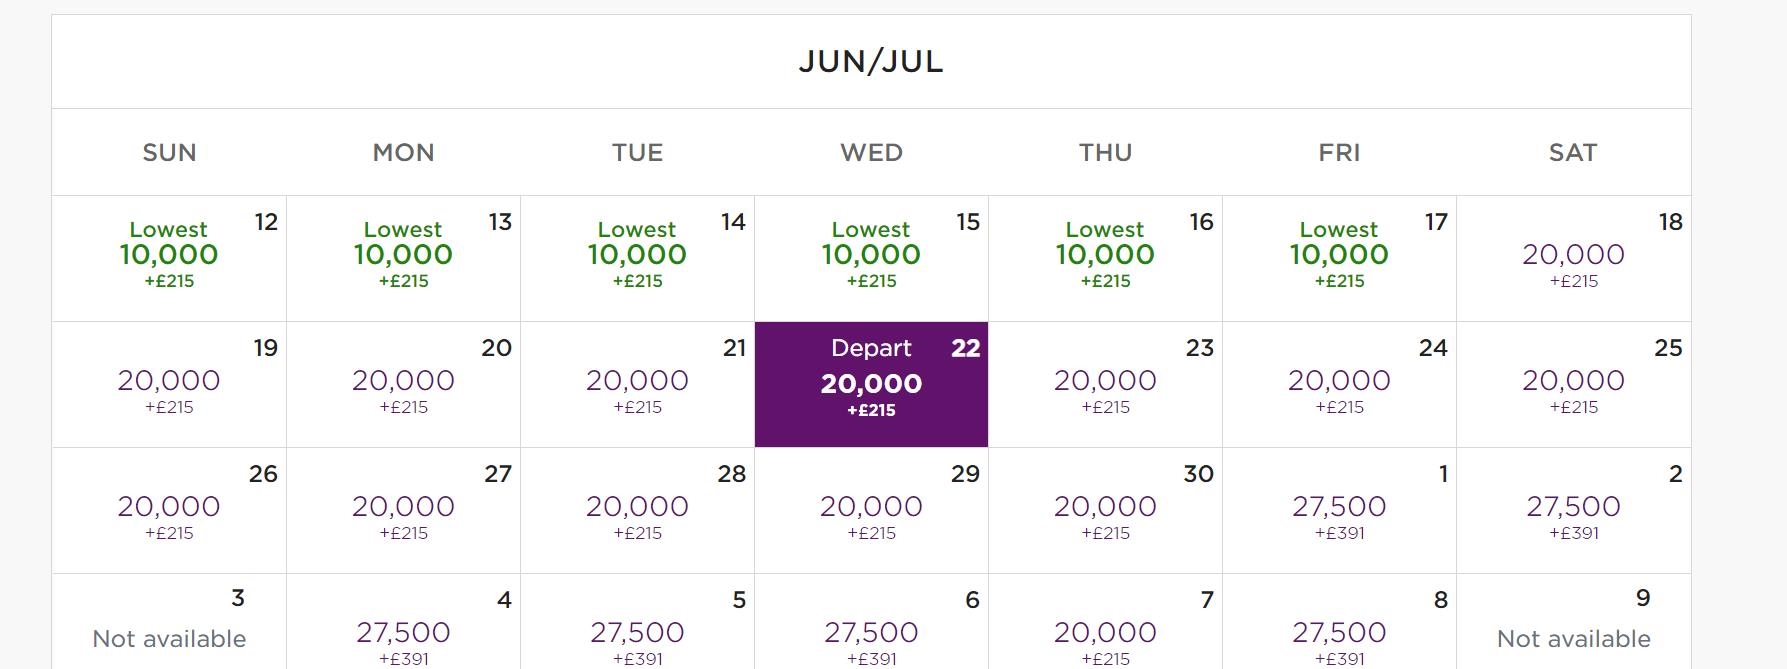 The Virgin Atlantic monthly award calendar still exists Here s how to